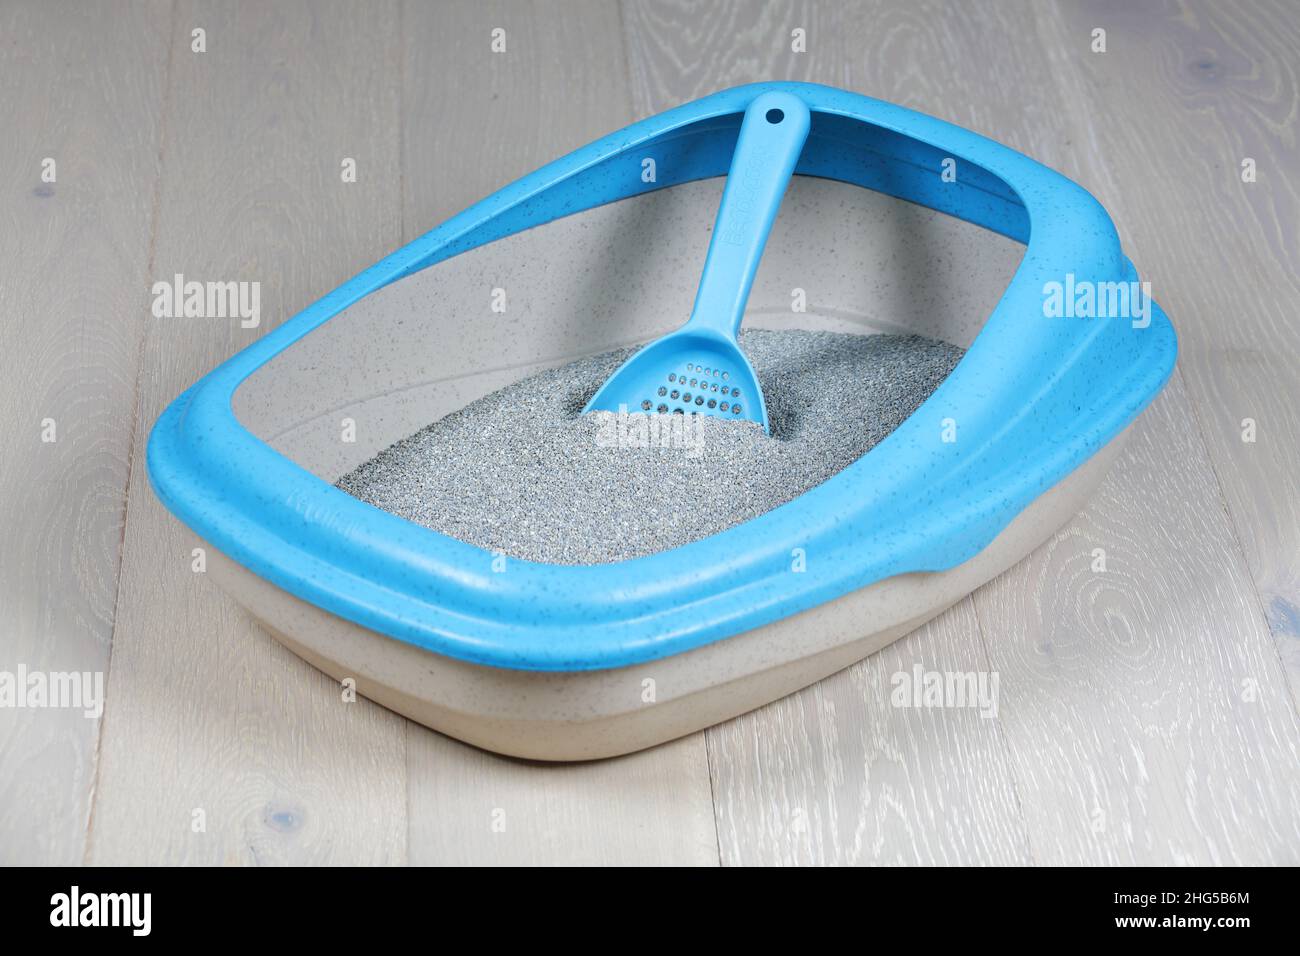 Cat litter tray and scoop on a wood floor Stock Photo